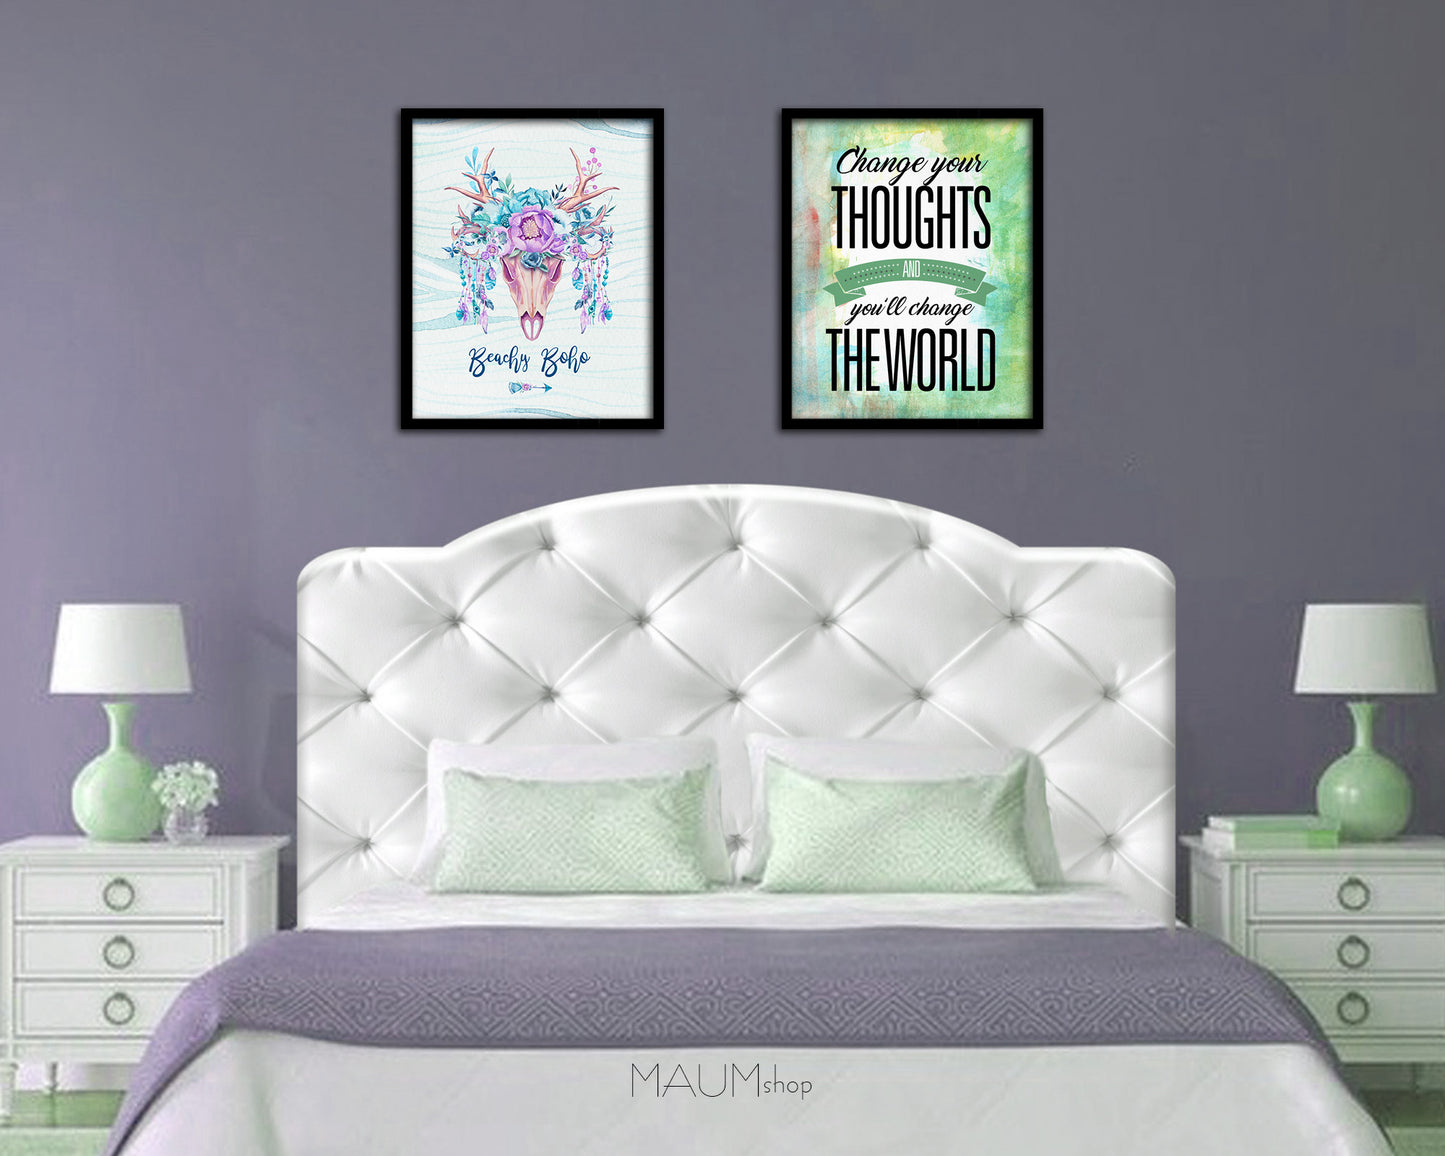 Change your thoughts & you'll chang the world Quote Framed Print Wall Decor Art Gifts